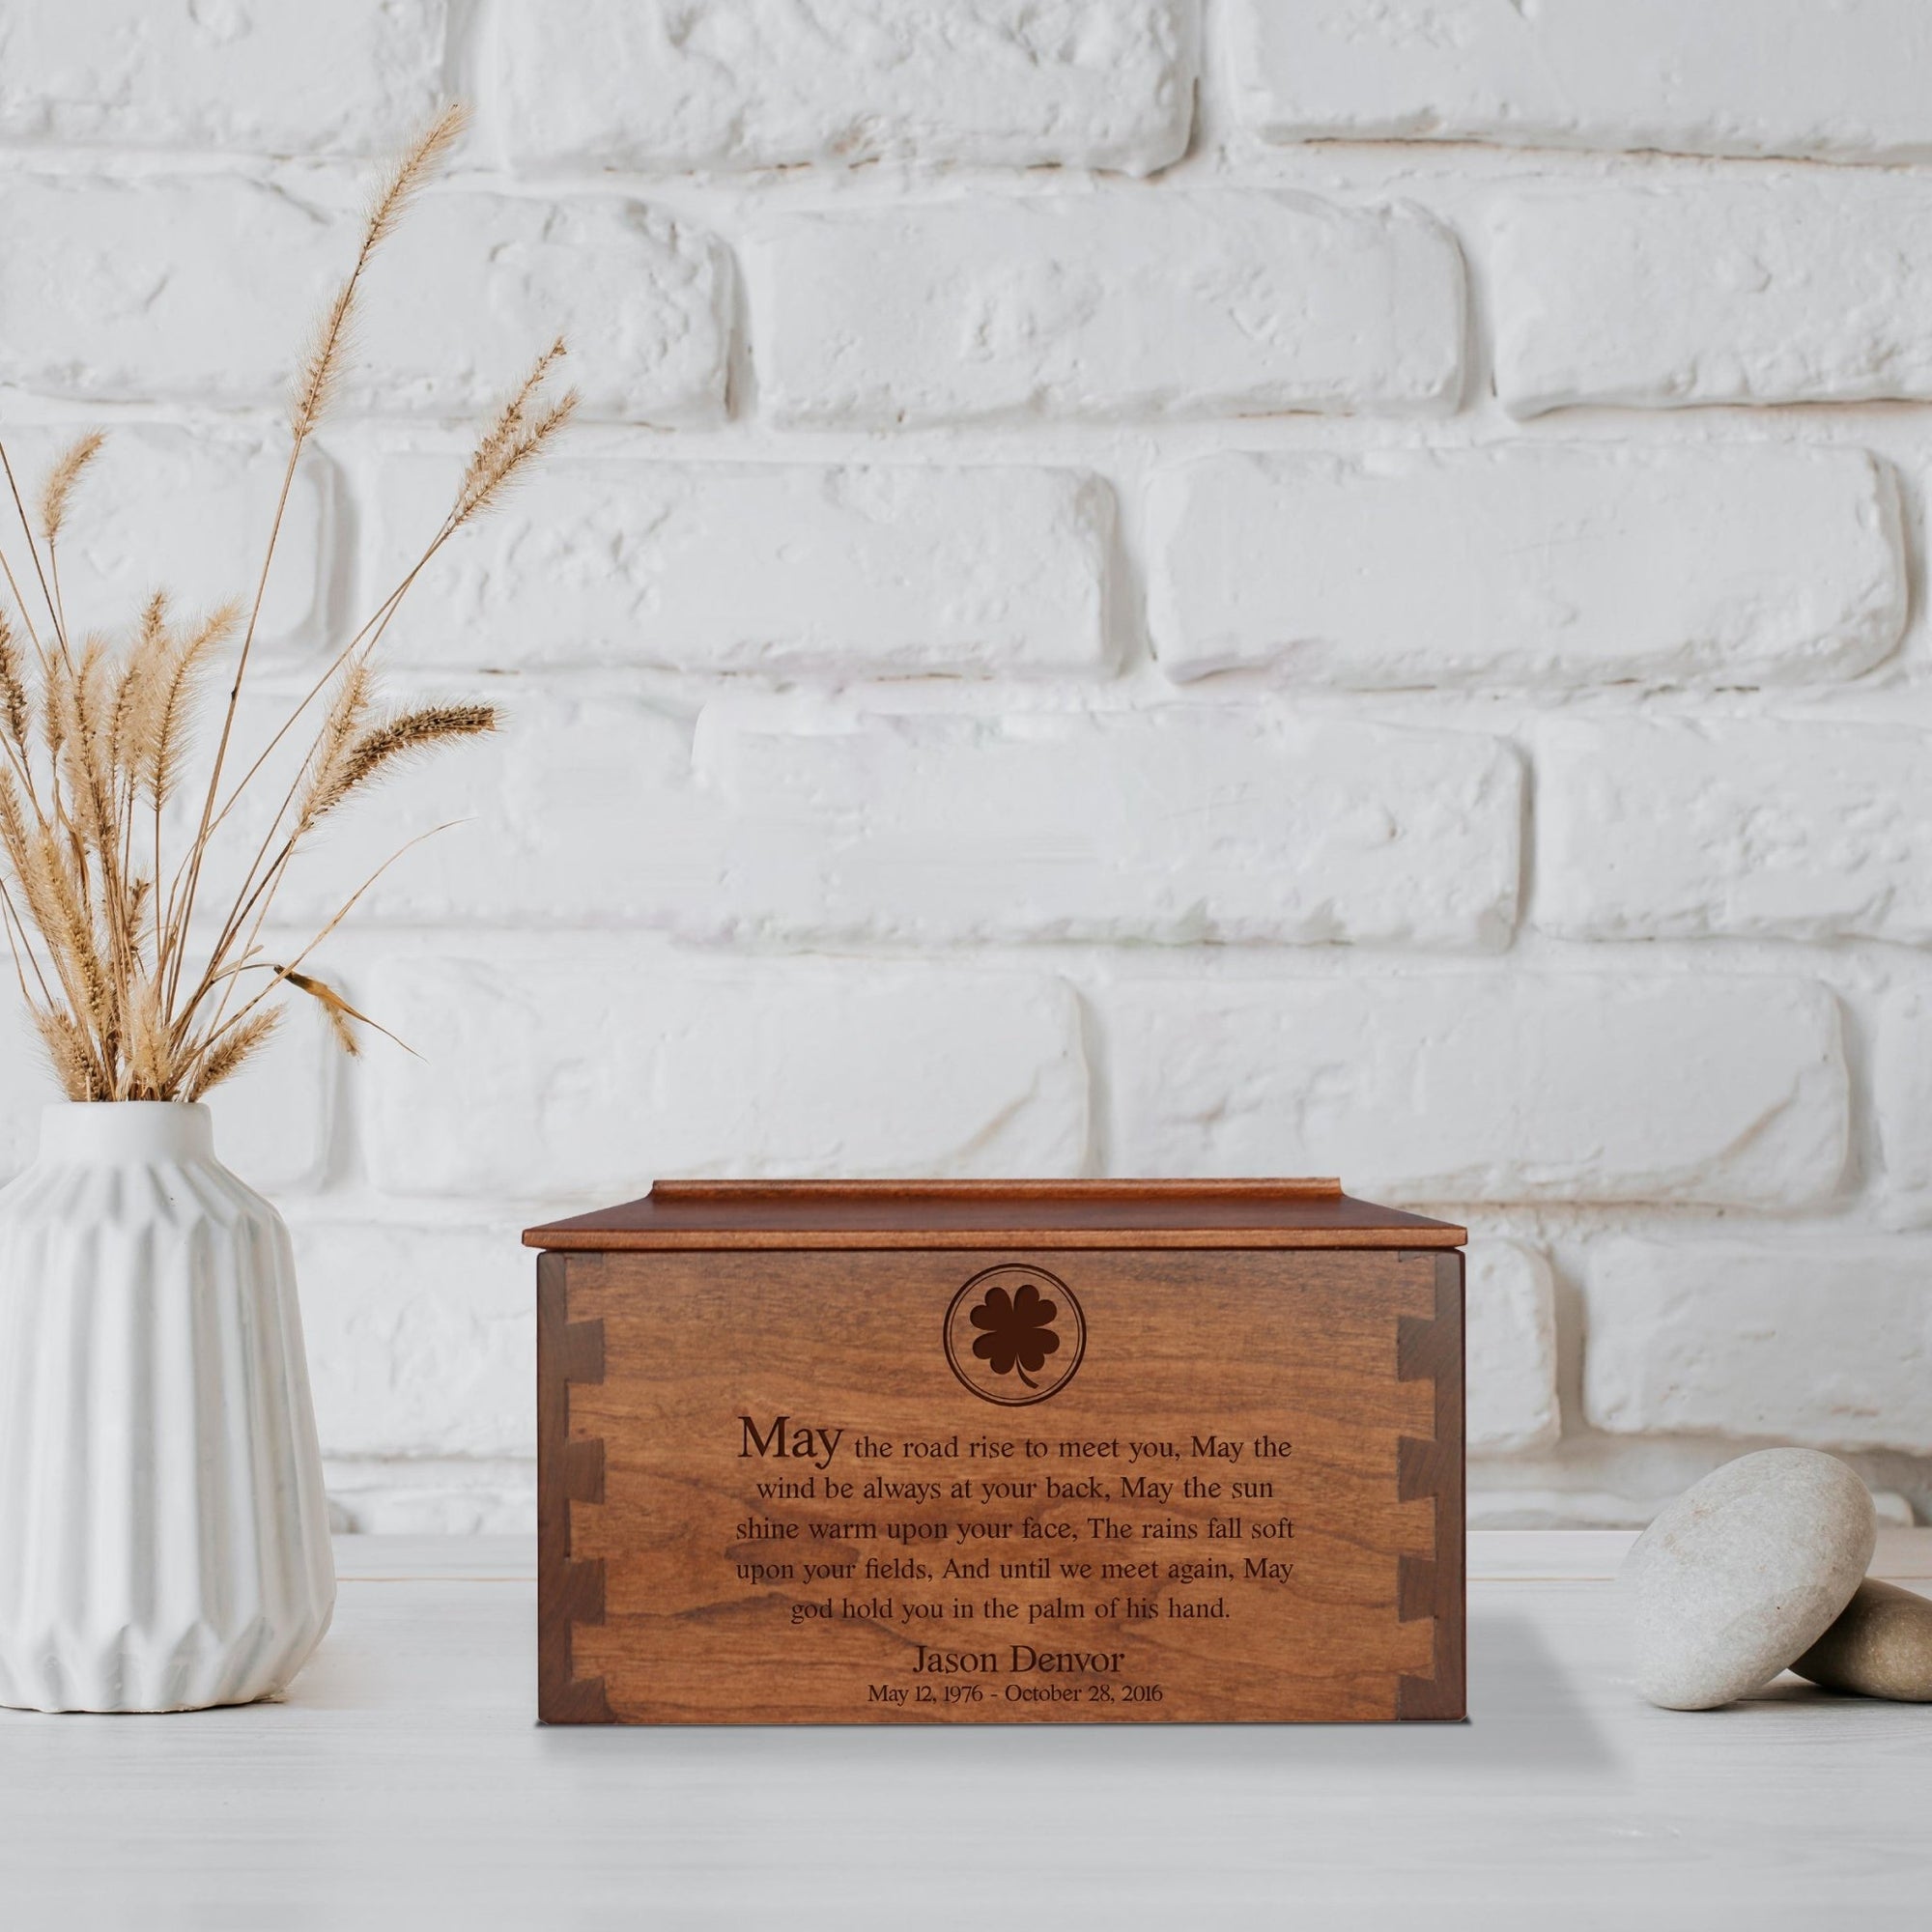 Custom Wooden Cremation Urn Box Medium for Human Ashes holds 146 cu in May The Road - LifeSong Milestones